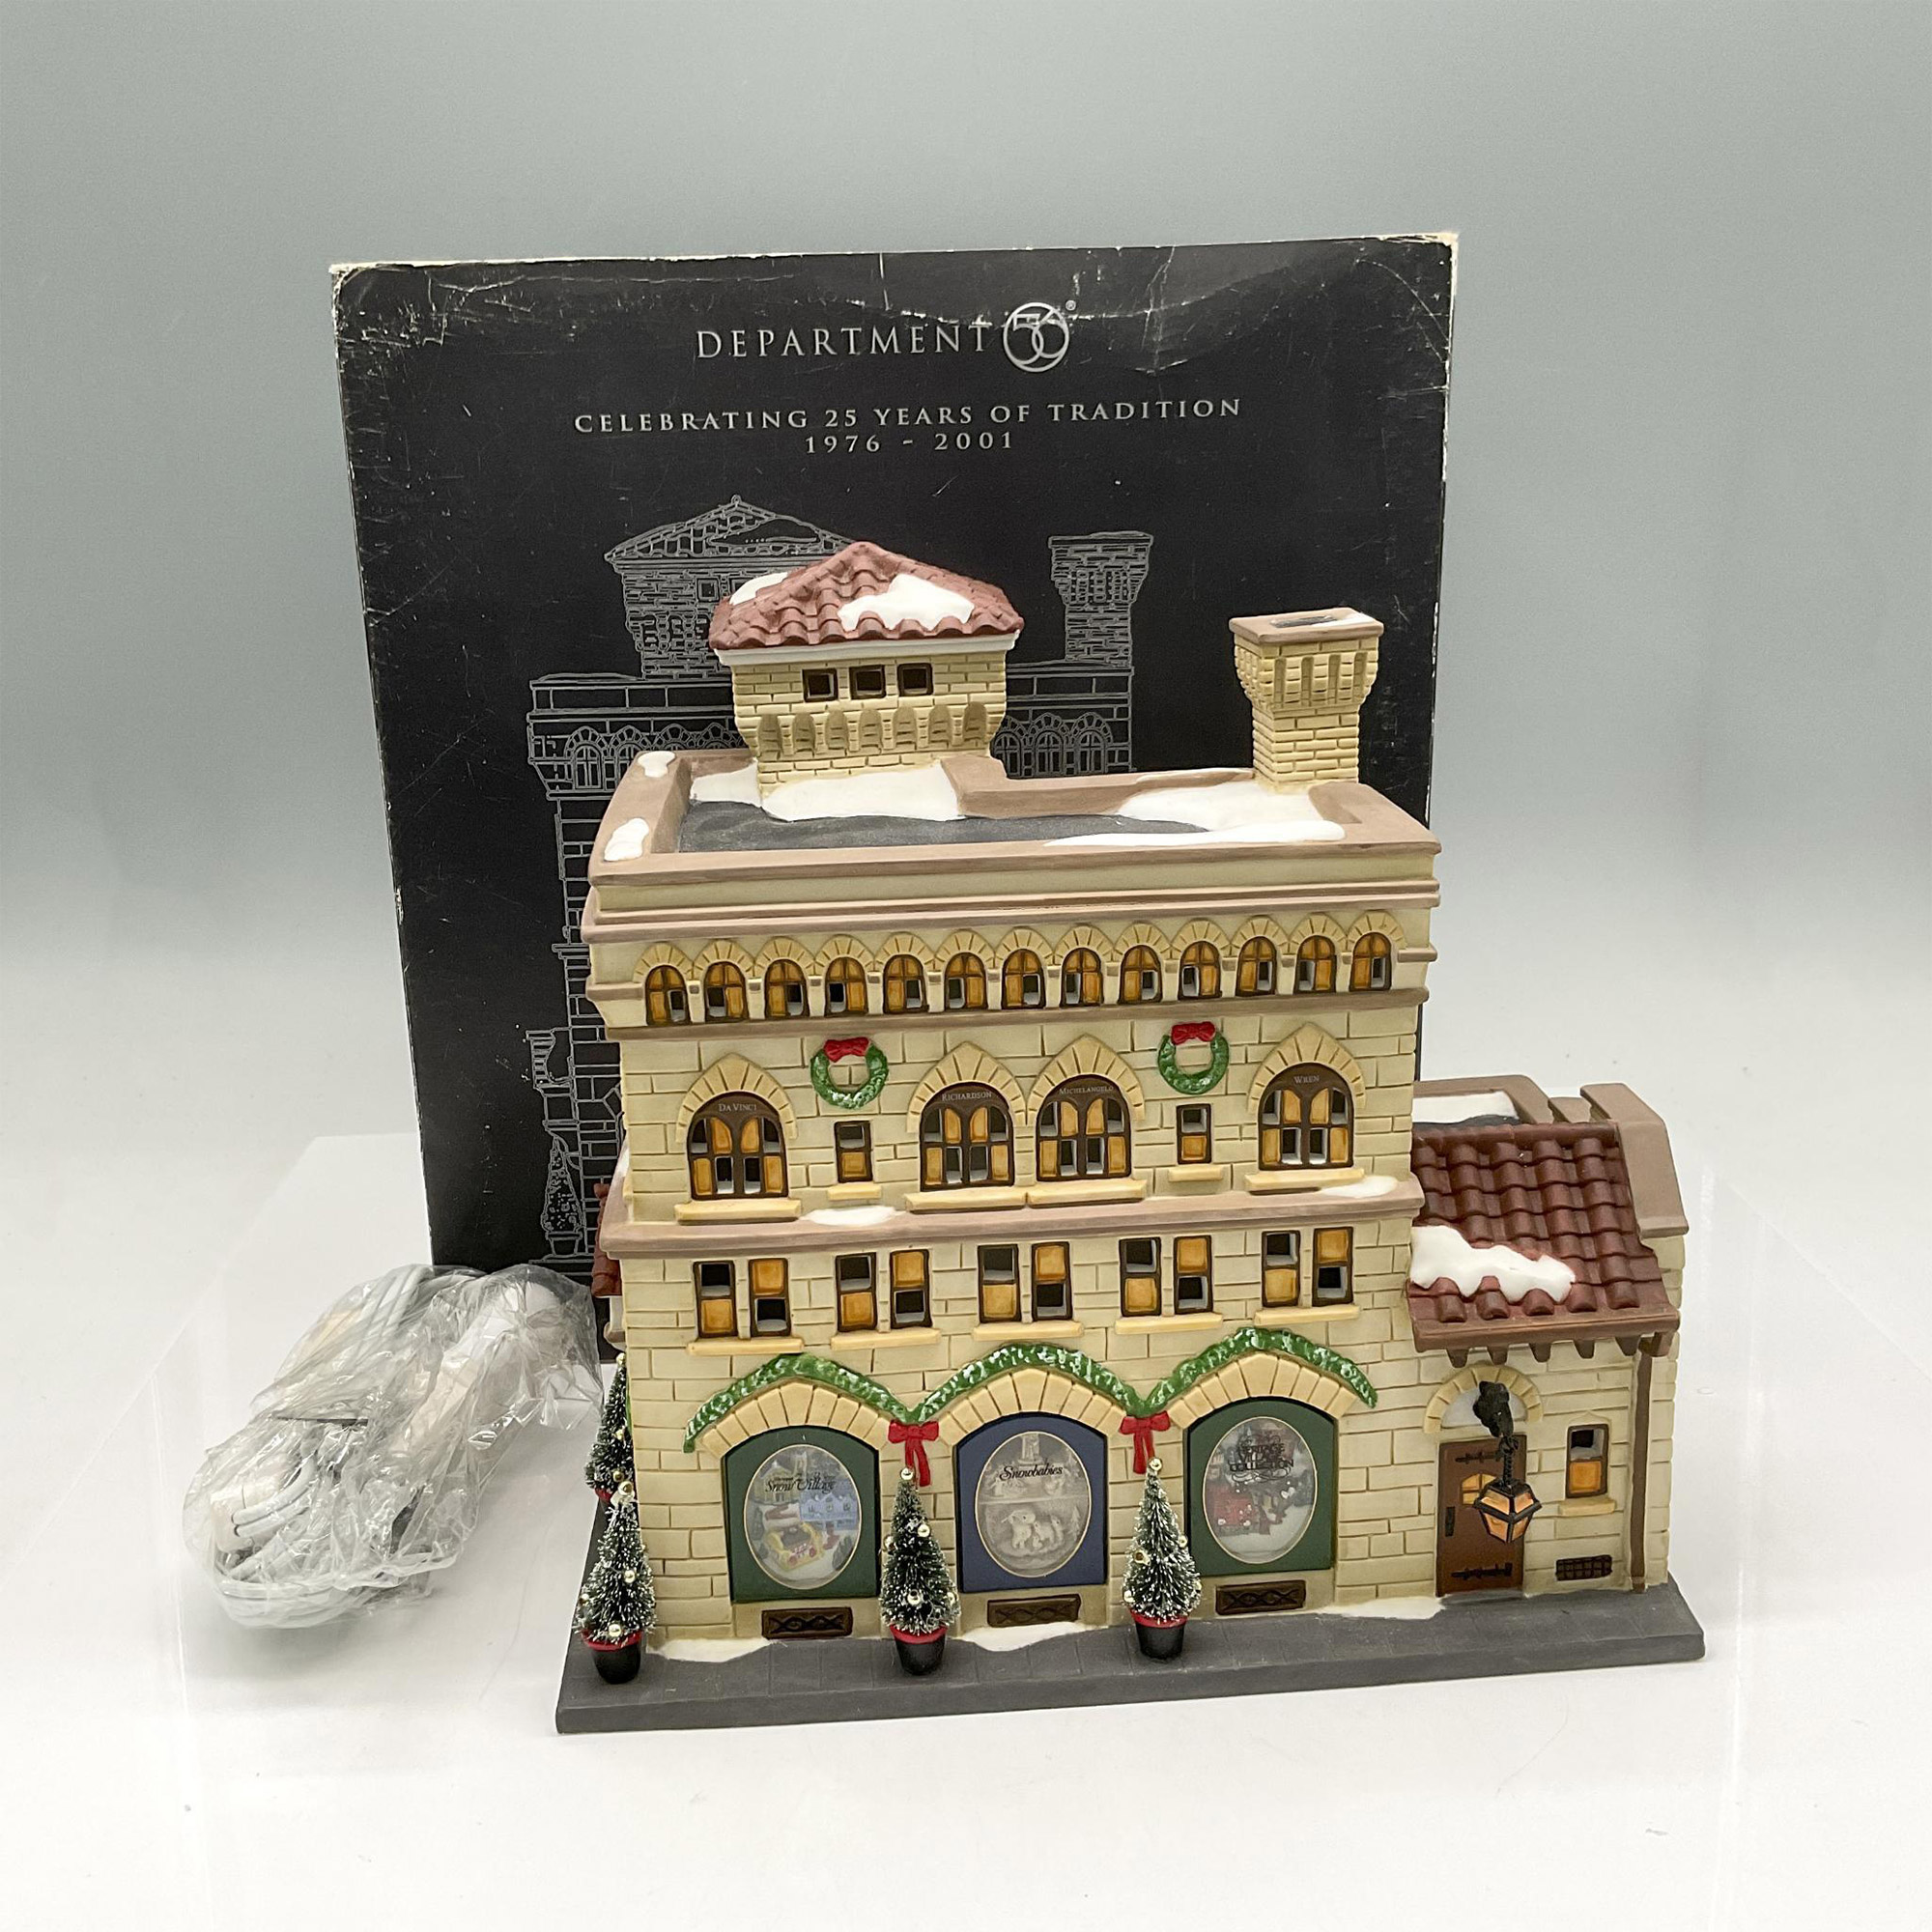 Department 56 Porcelain Anniversary Event Edition - Image 2 of 6